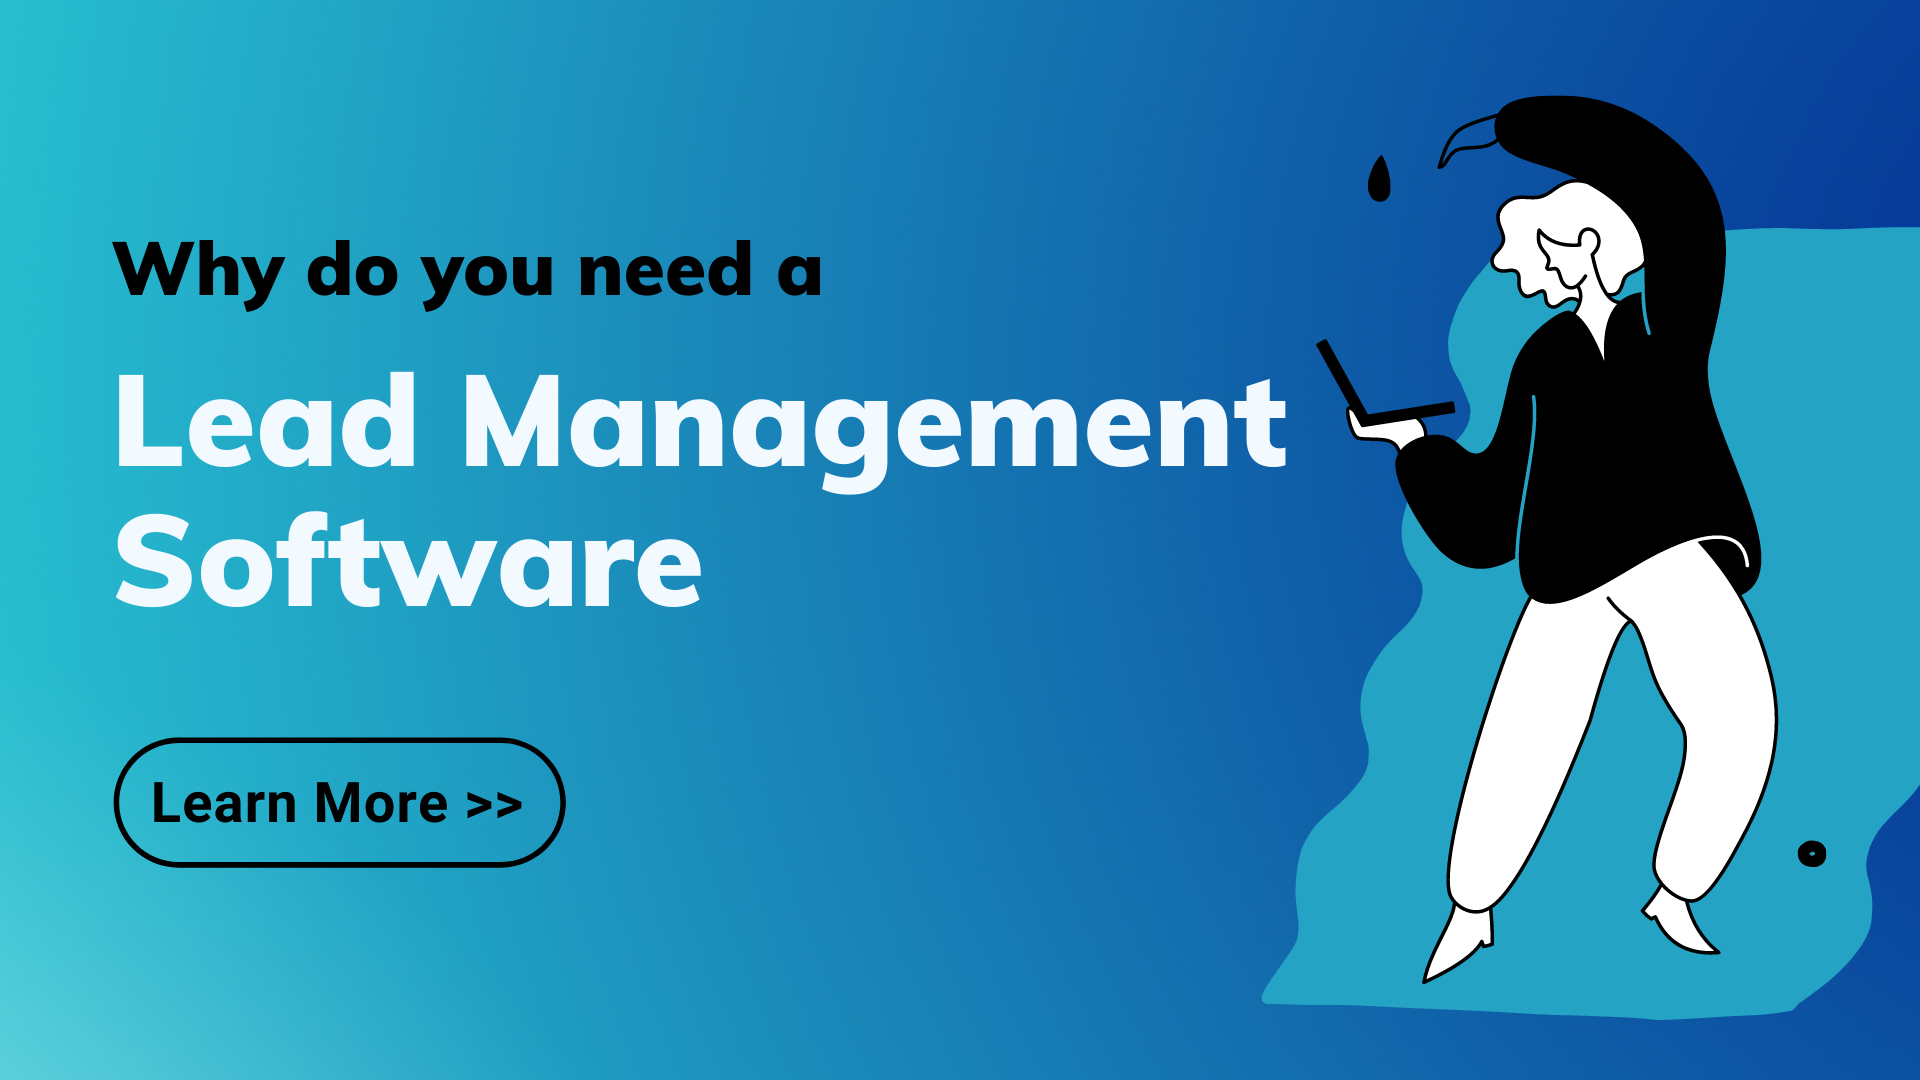 Why do you need a lead management software?